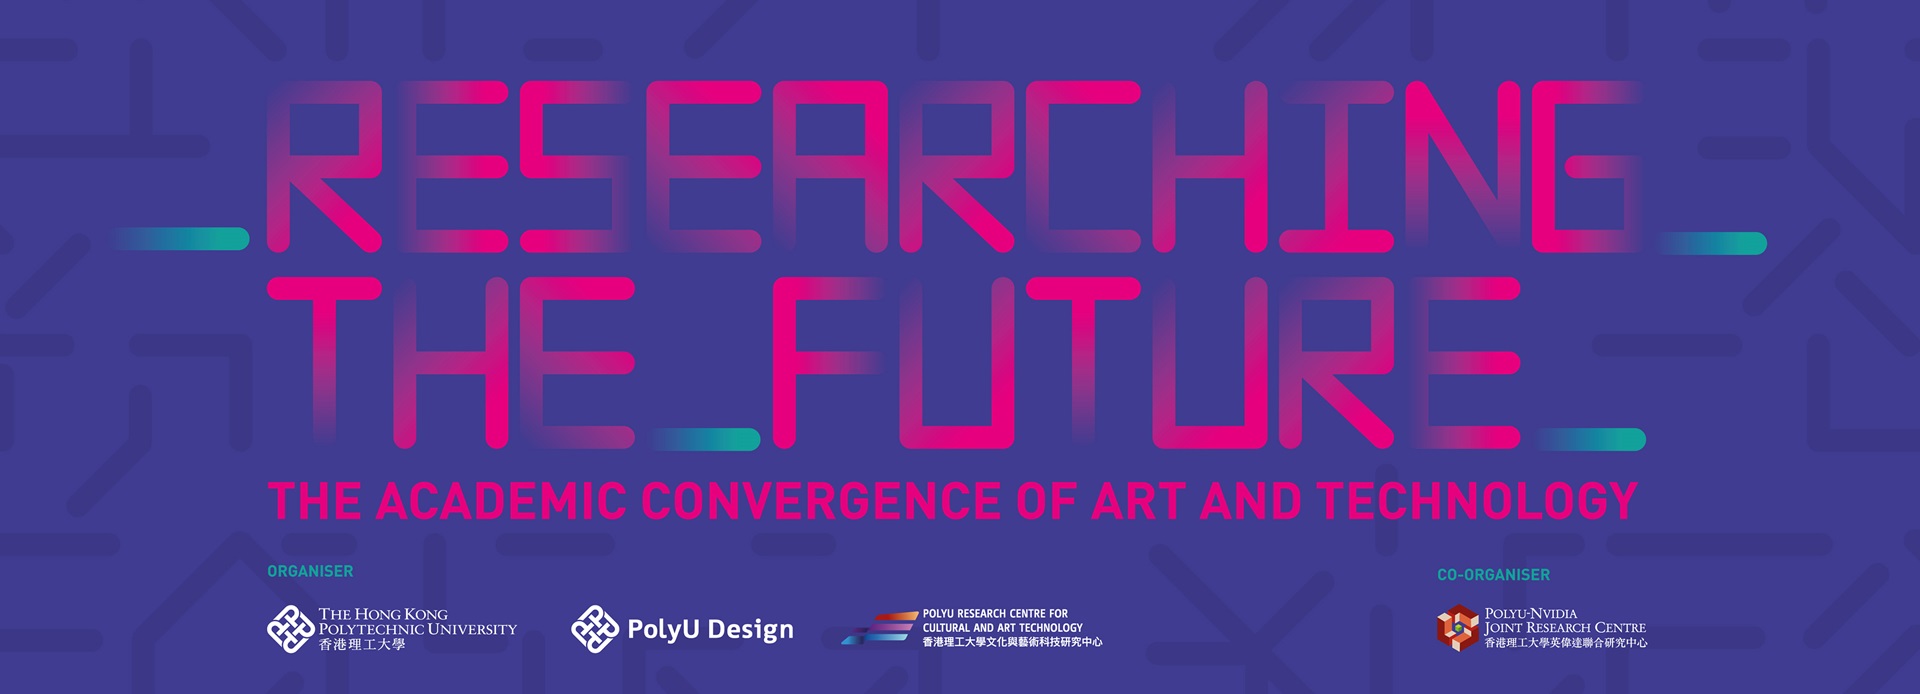 Researching the Future - The Academic Convergence of Art and Technology